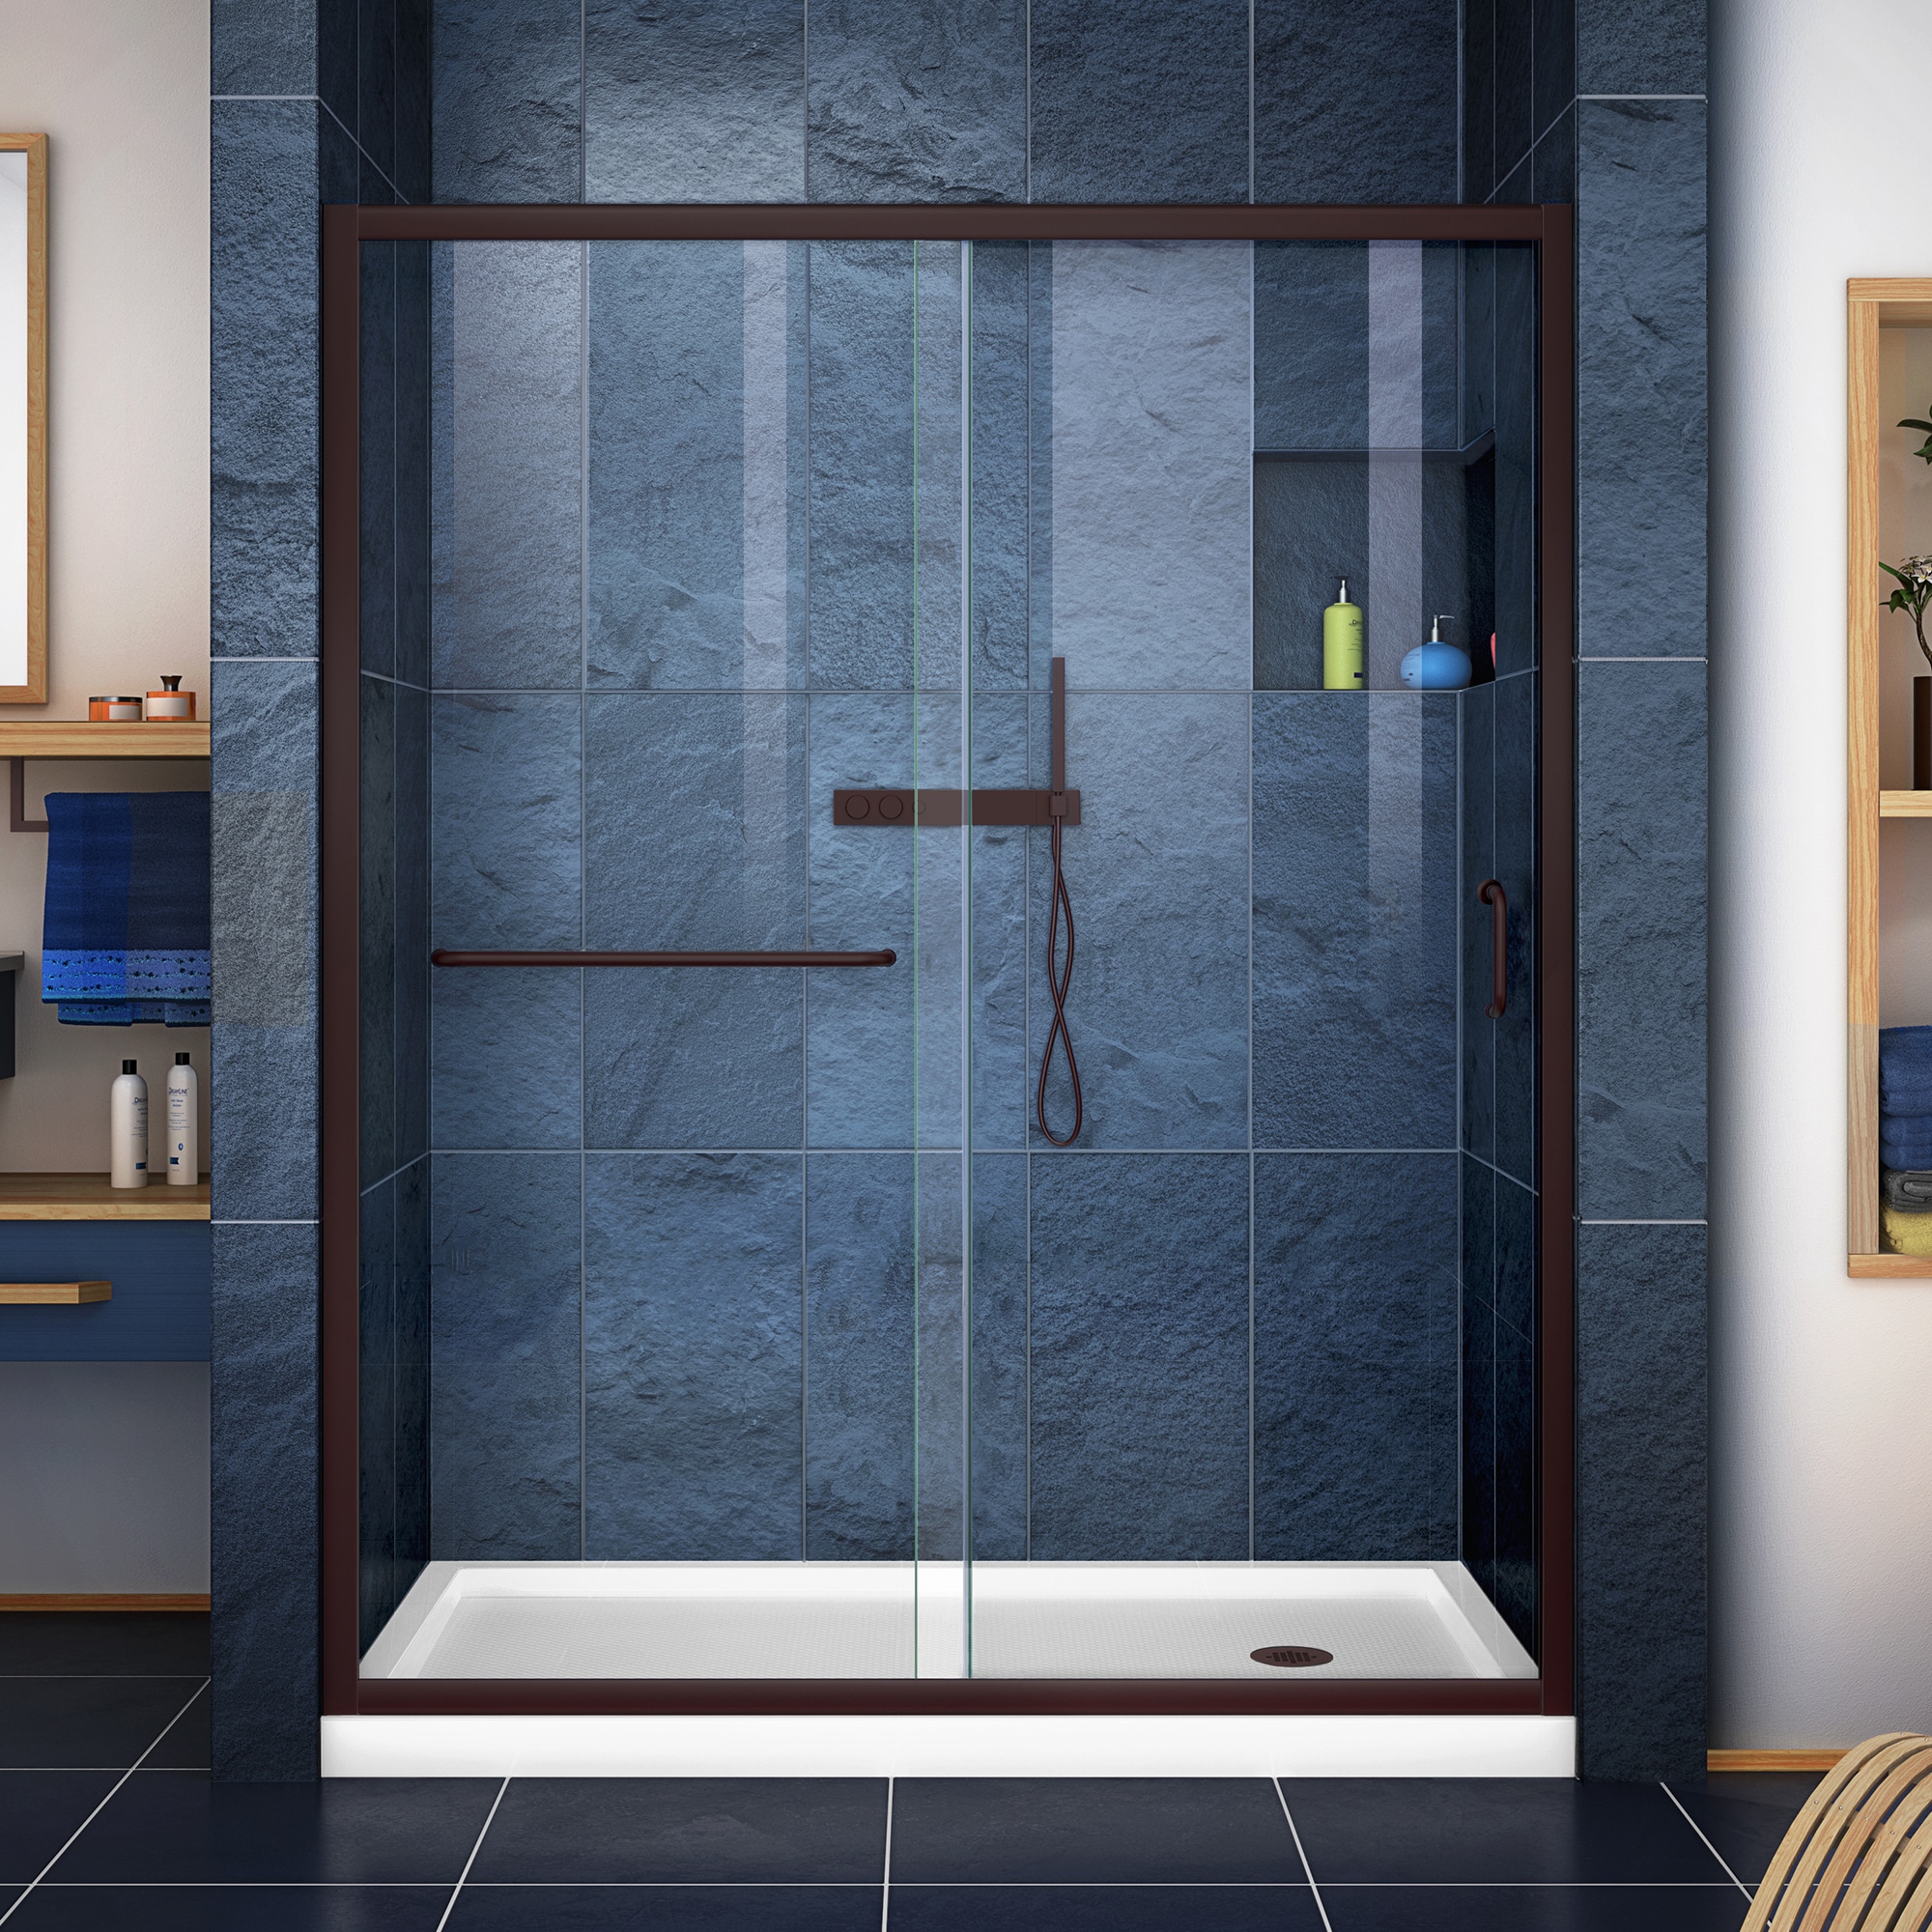 Small Bathroom Glass Enclosure Shower Stall with 2 Hinged Doors